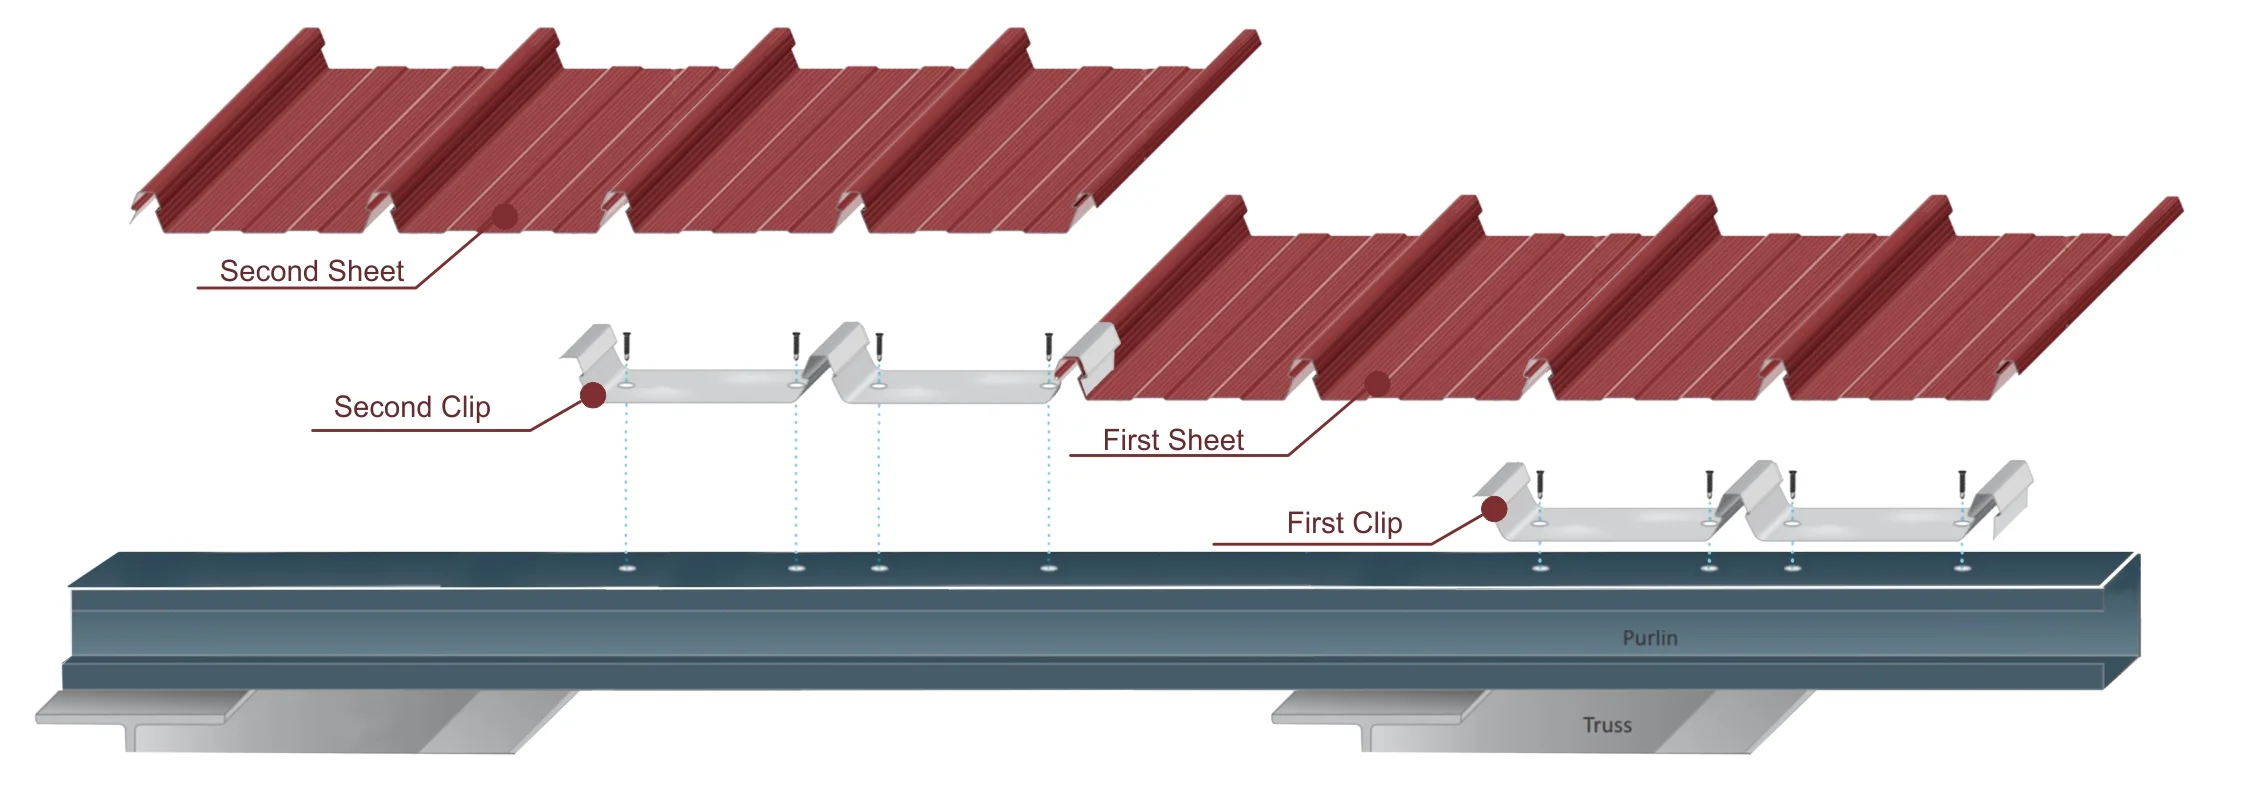 GLOK Rib And Clip Roofing Solution